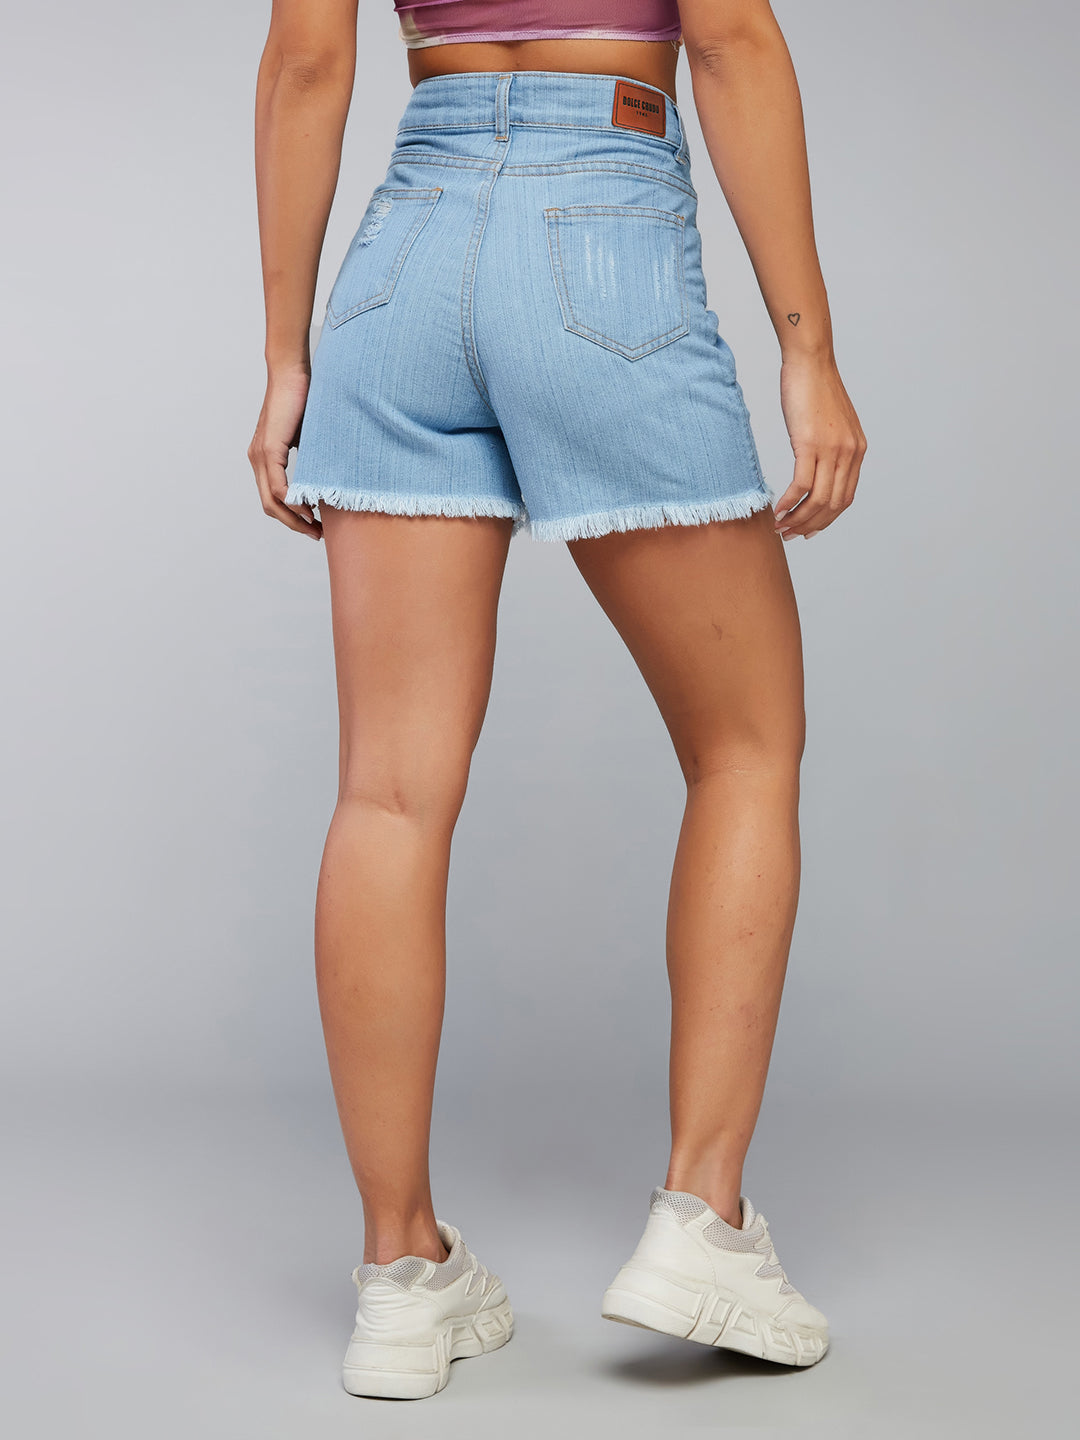 Women's Blue Relaxed Fit Mid Rise Highly Distressed Regular Length Denim Shorts